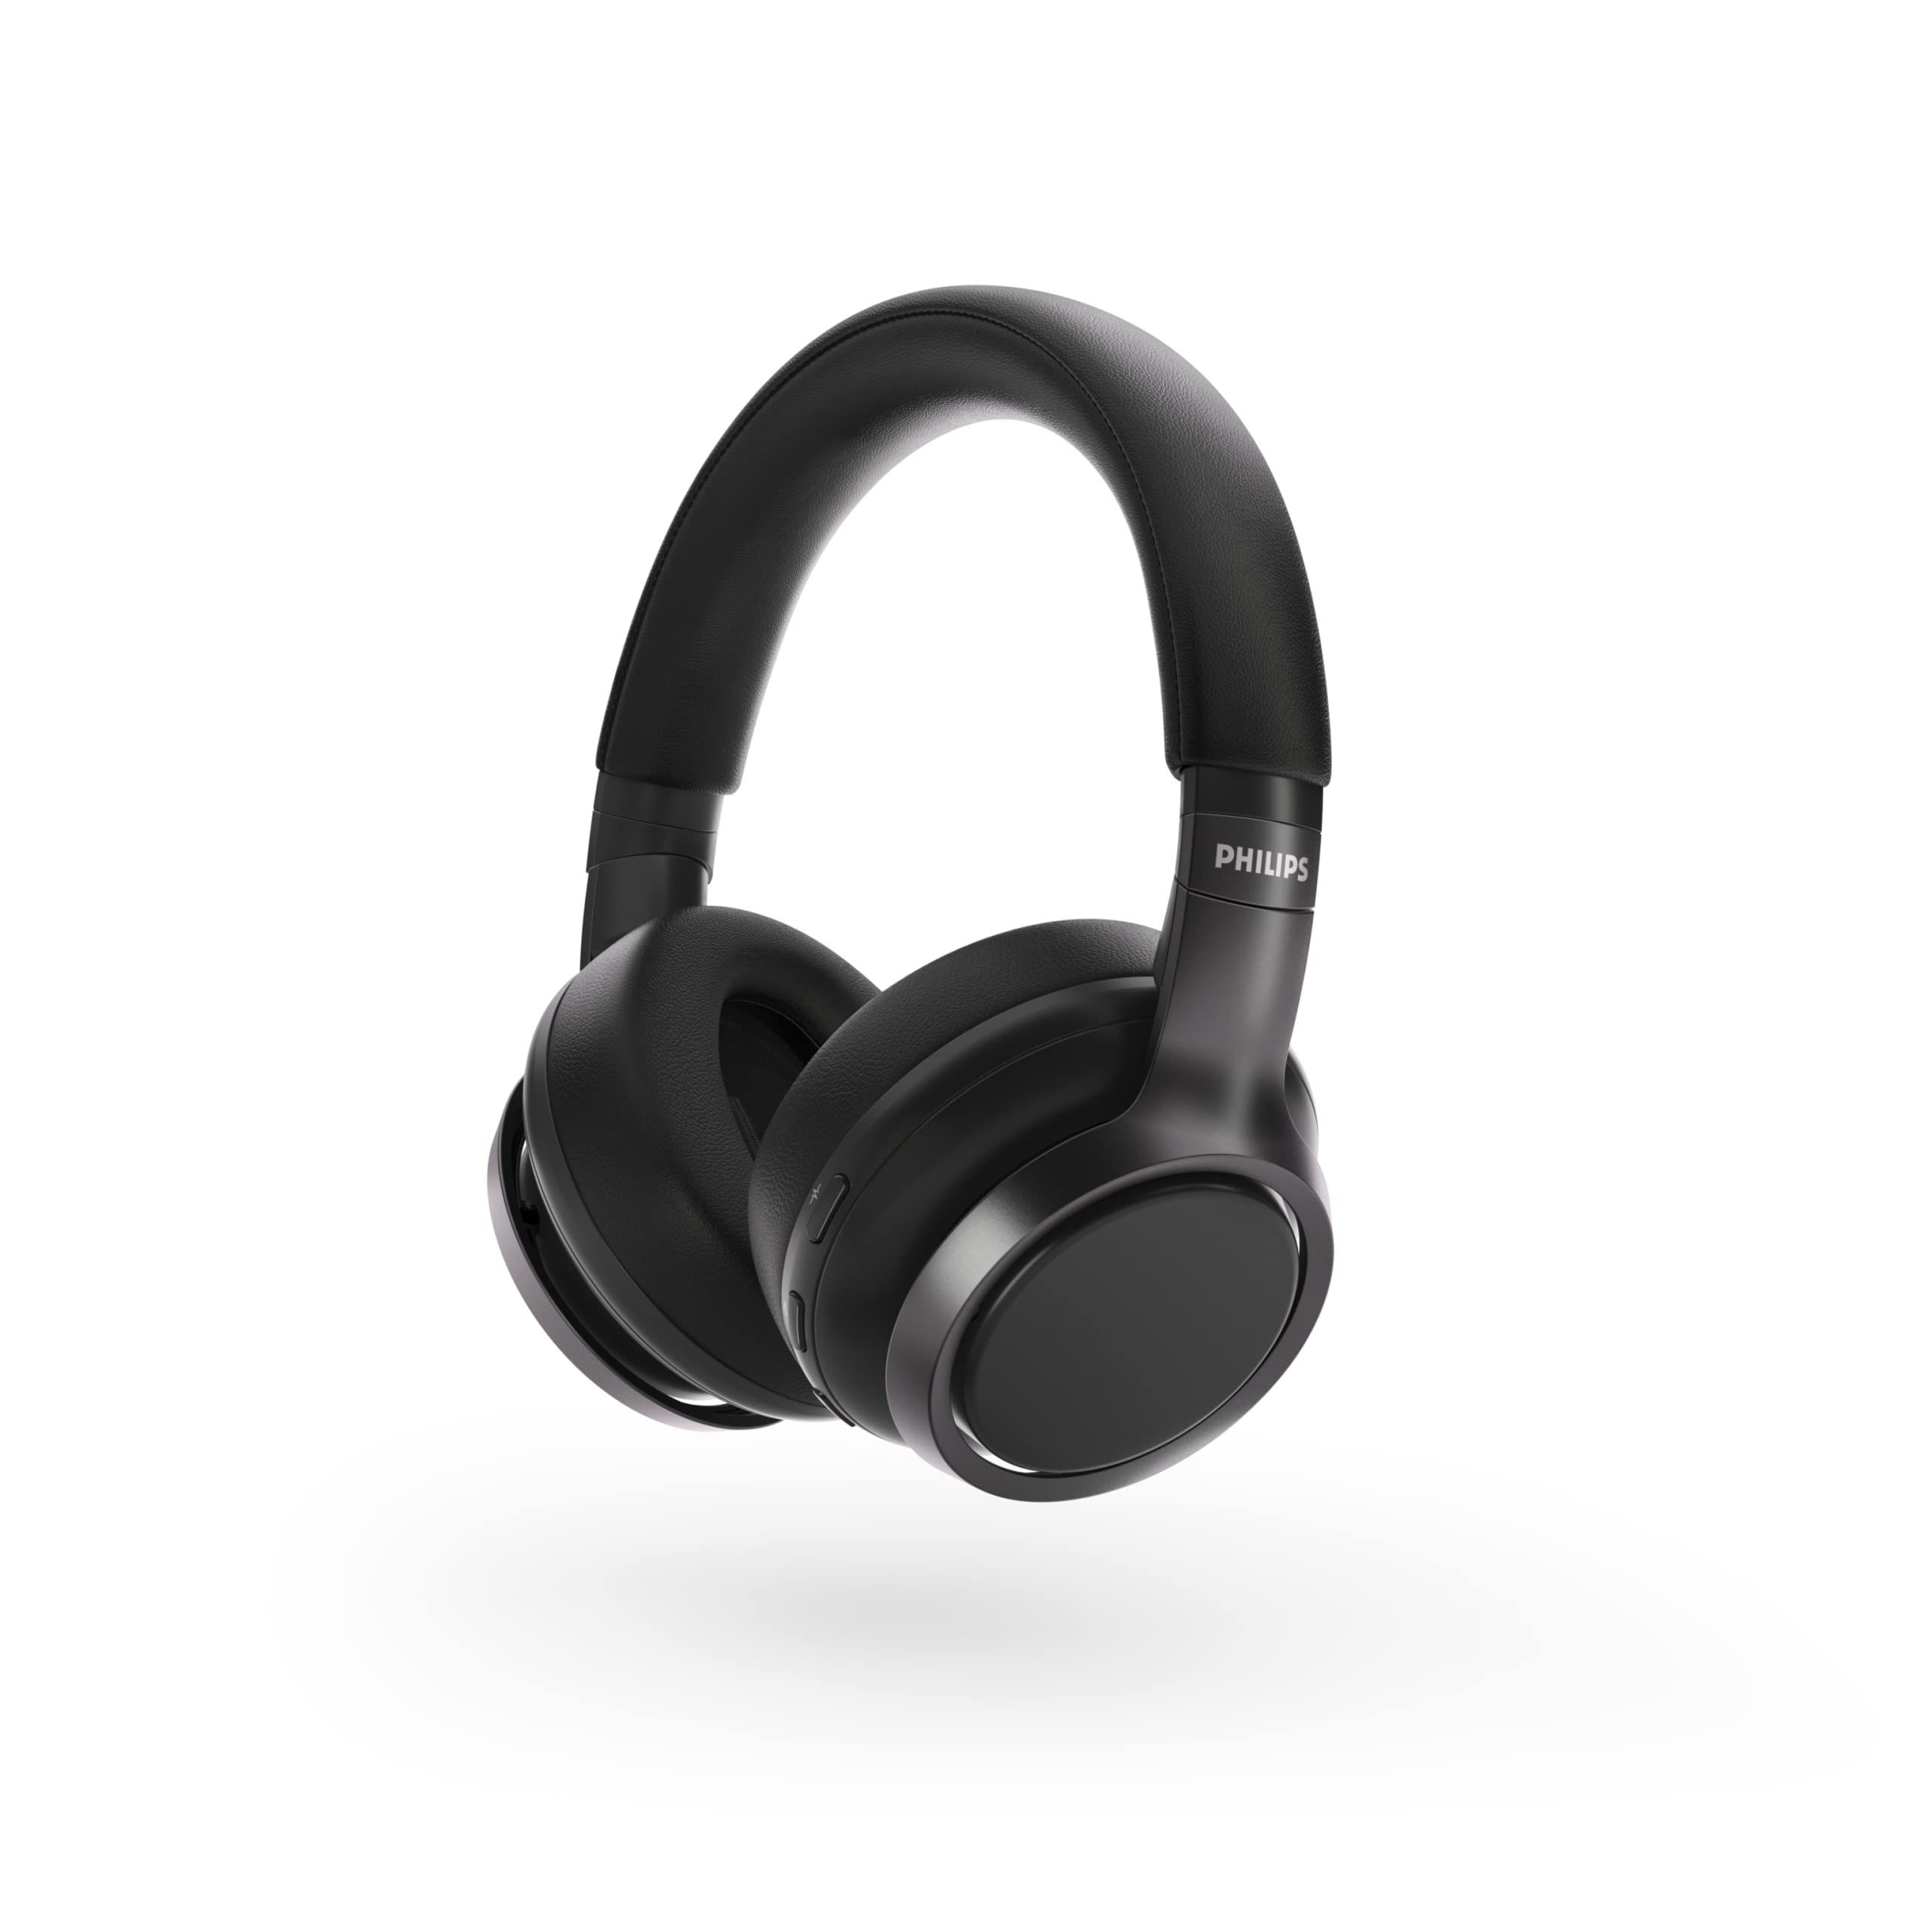 Philips Audio Philips H9505 Hybrid Active Noise Cancelling (ANC) Over-Ear-Wireless-Bluetooth-Pro-Performance-Kopfhörer mit Multipoint-Bluetooth-Verbindung